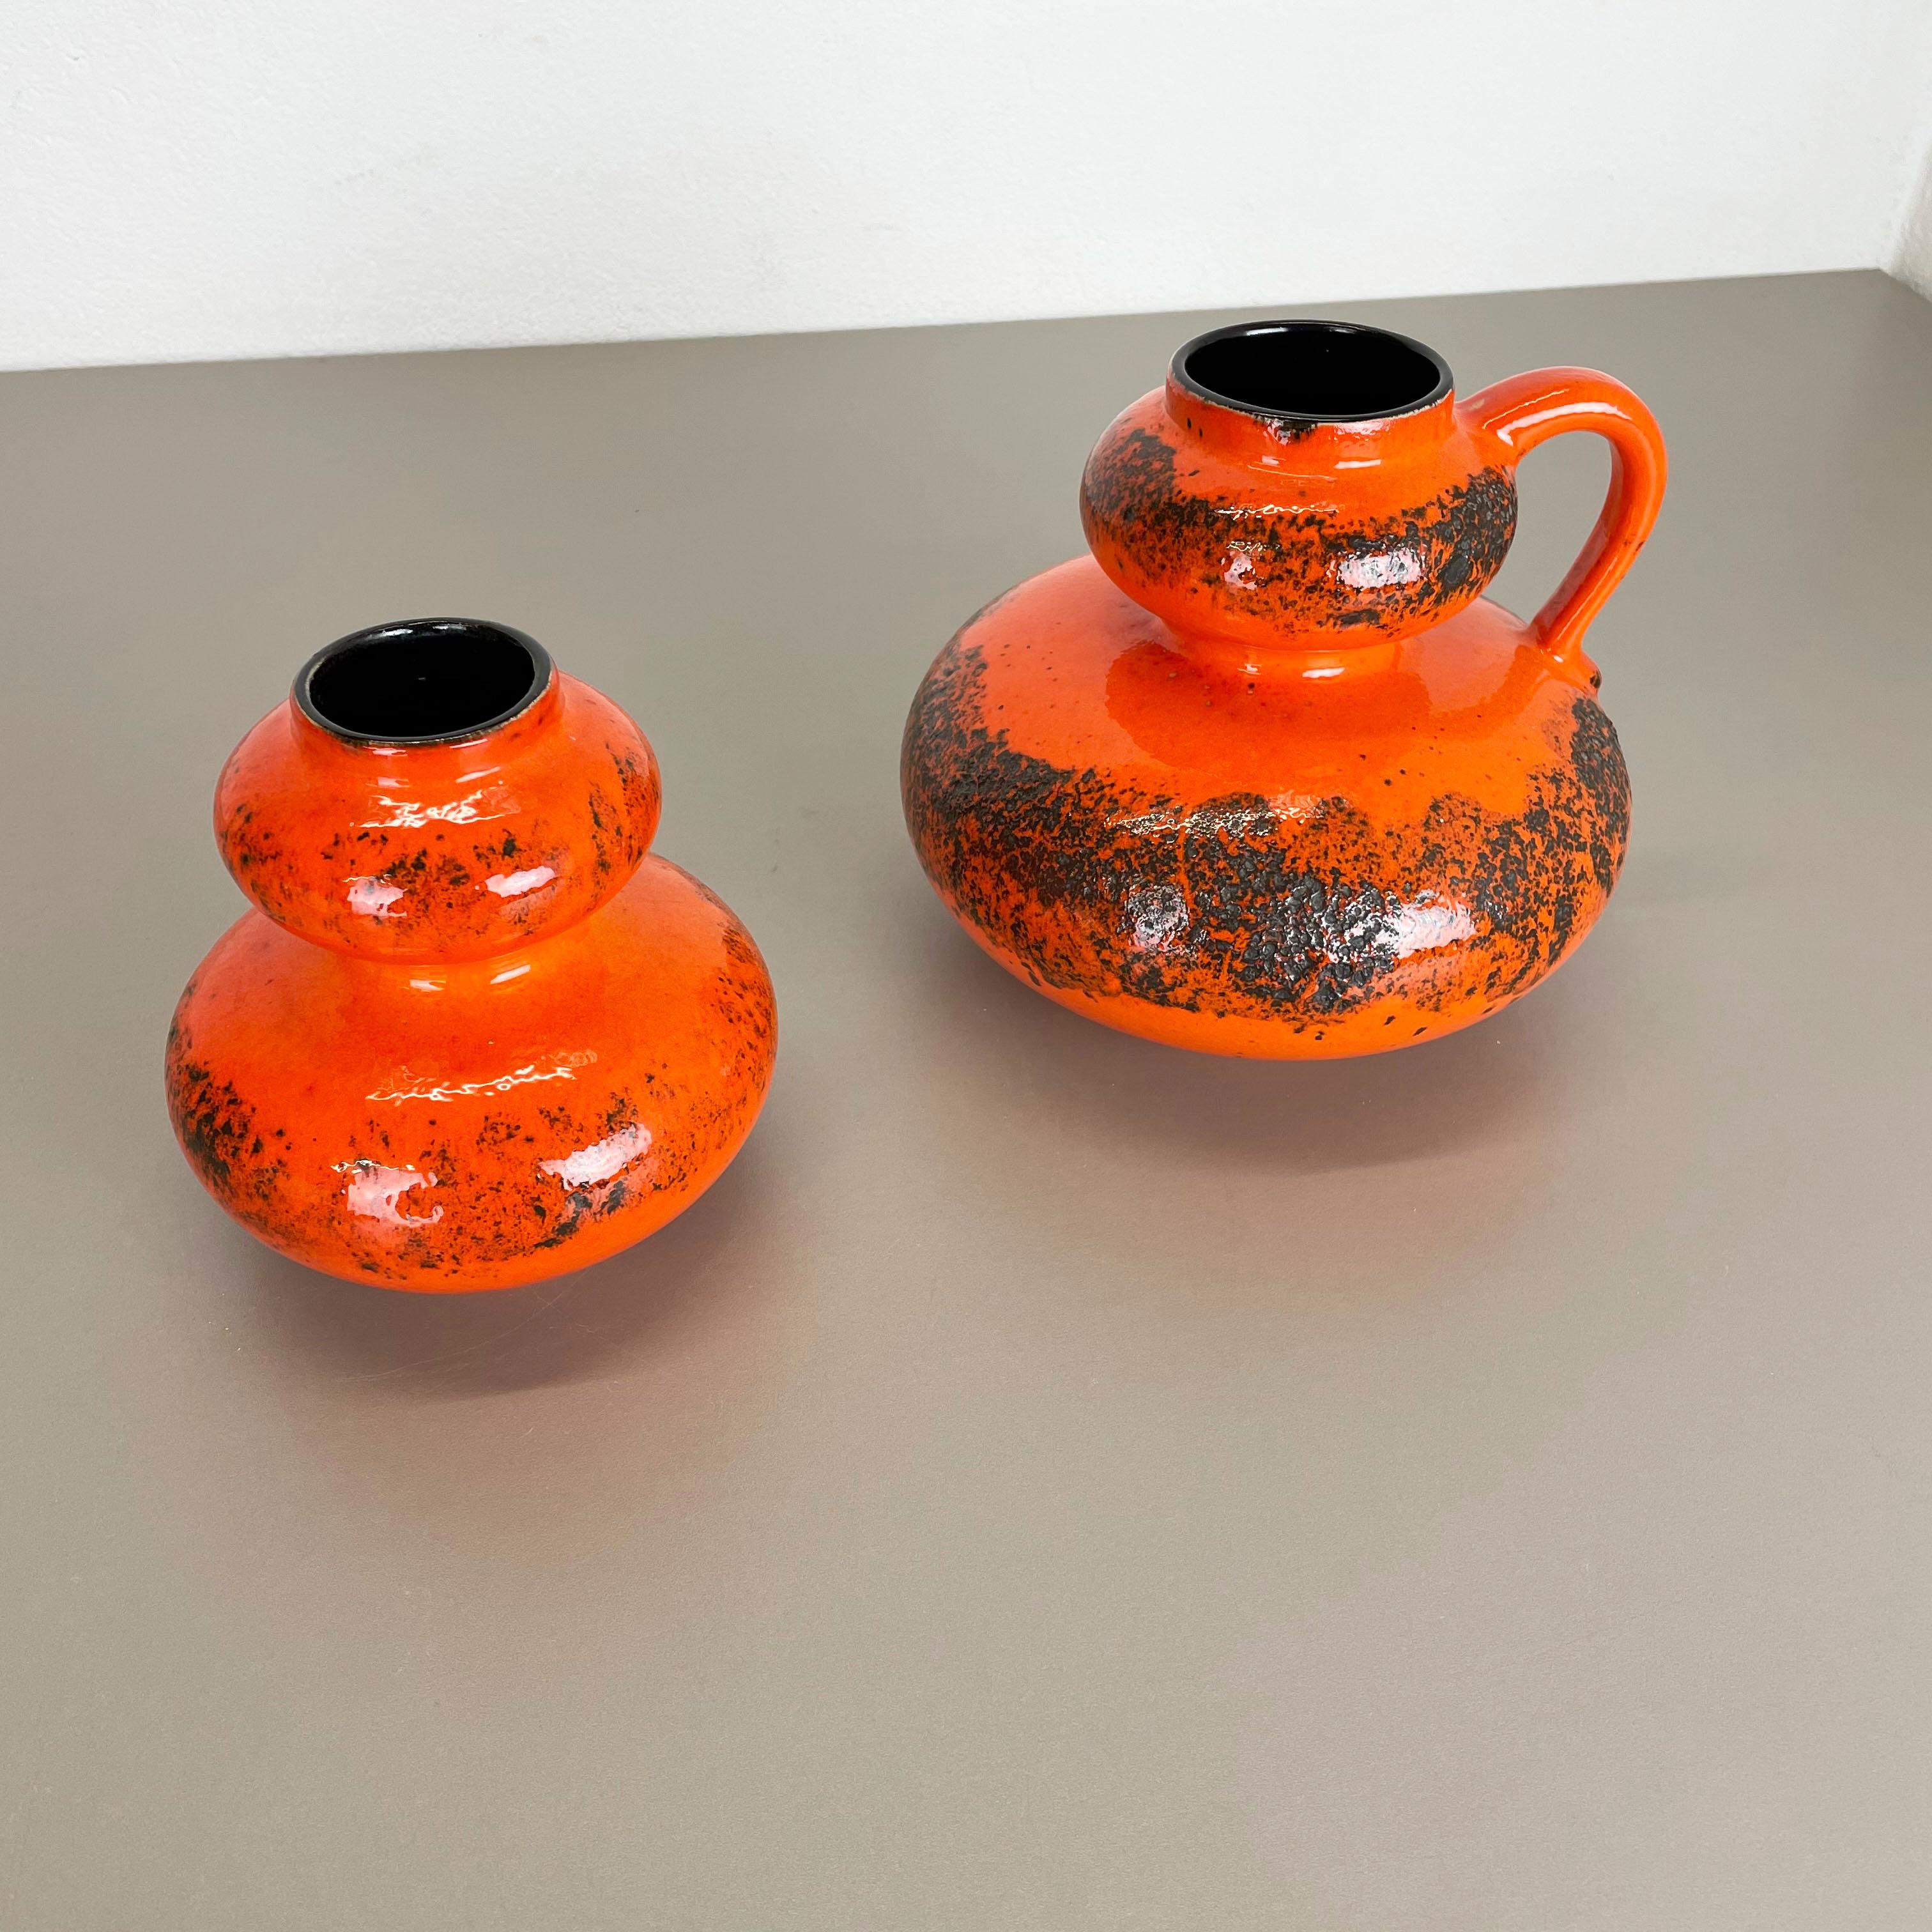 Article:

Set of two fat lava art vases

model: 
236-15
466-18


Producer:

Spara ceramic, Germany



Decade:

1970s


Description:

These original vintage vases was produced in the 1970s in Germany. It is made of ceramic